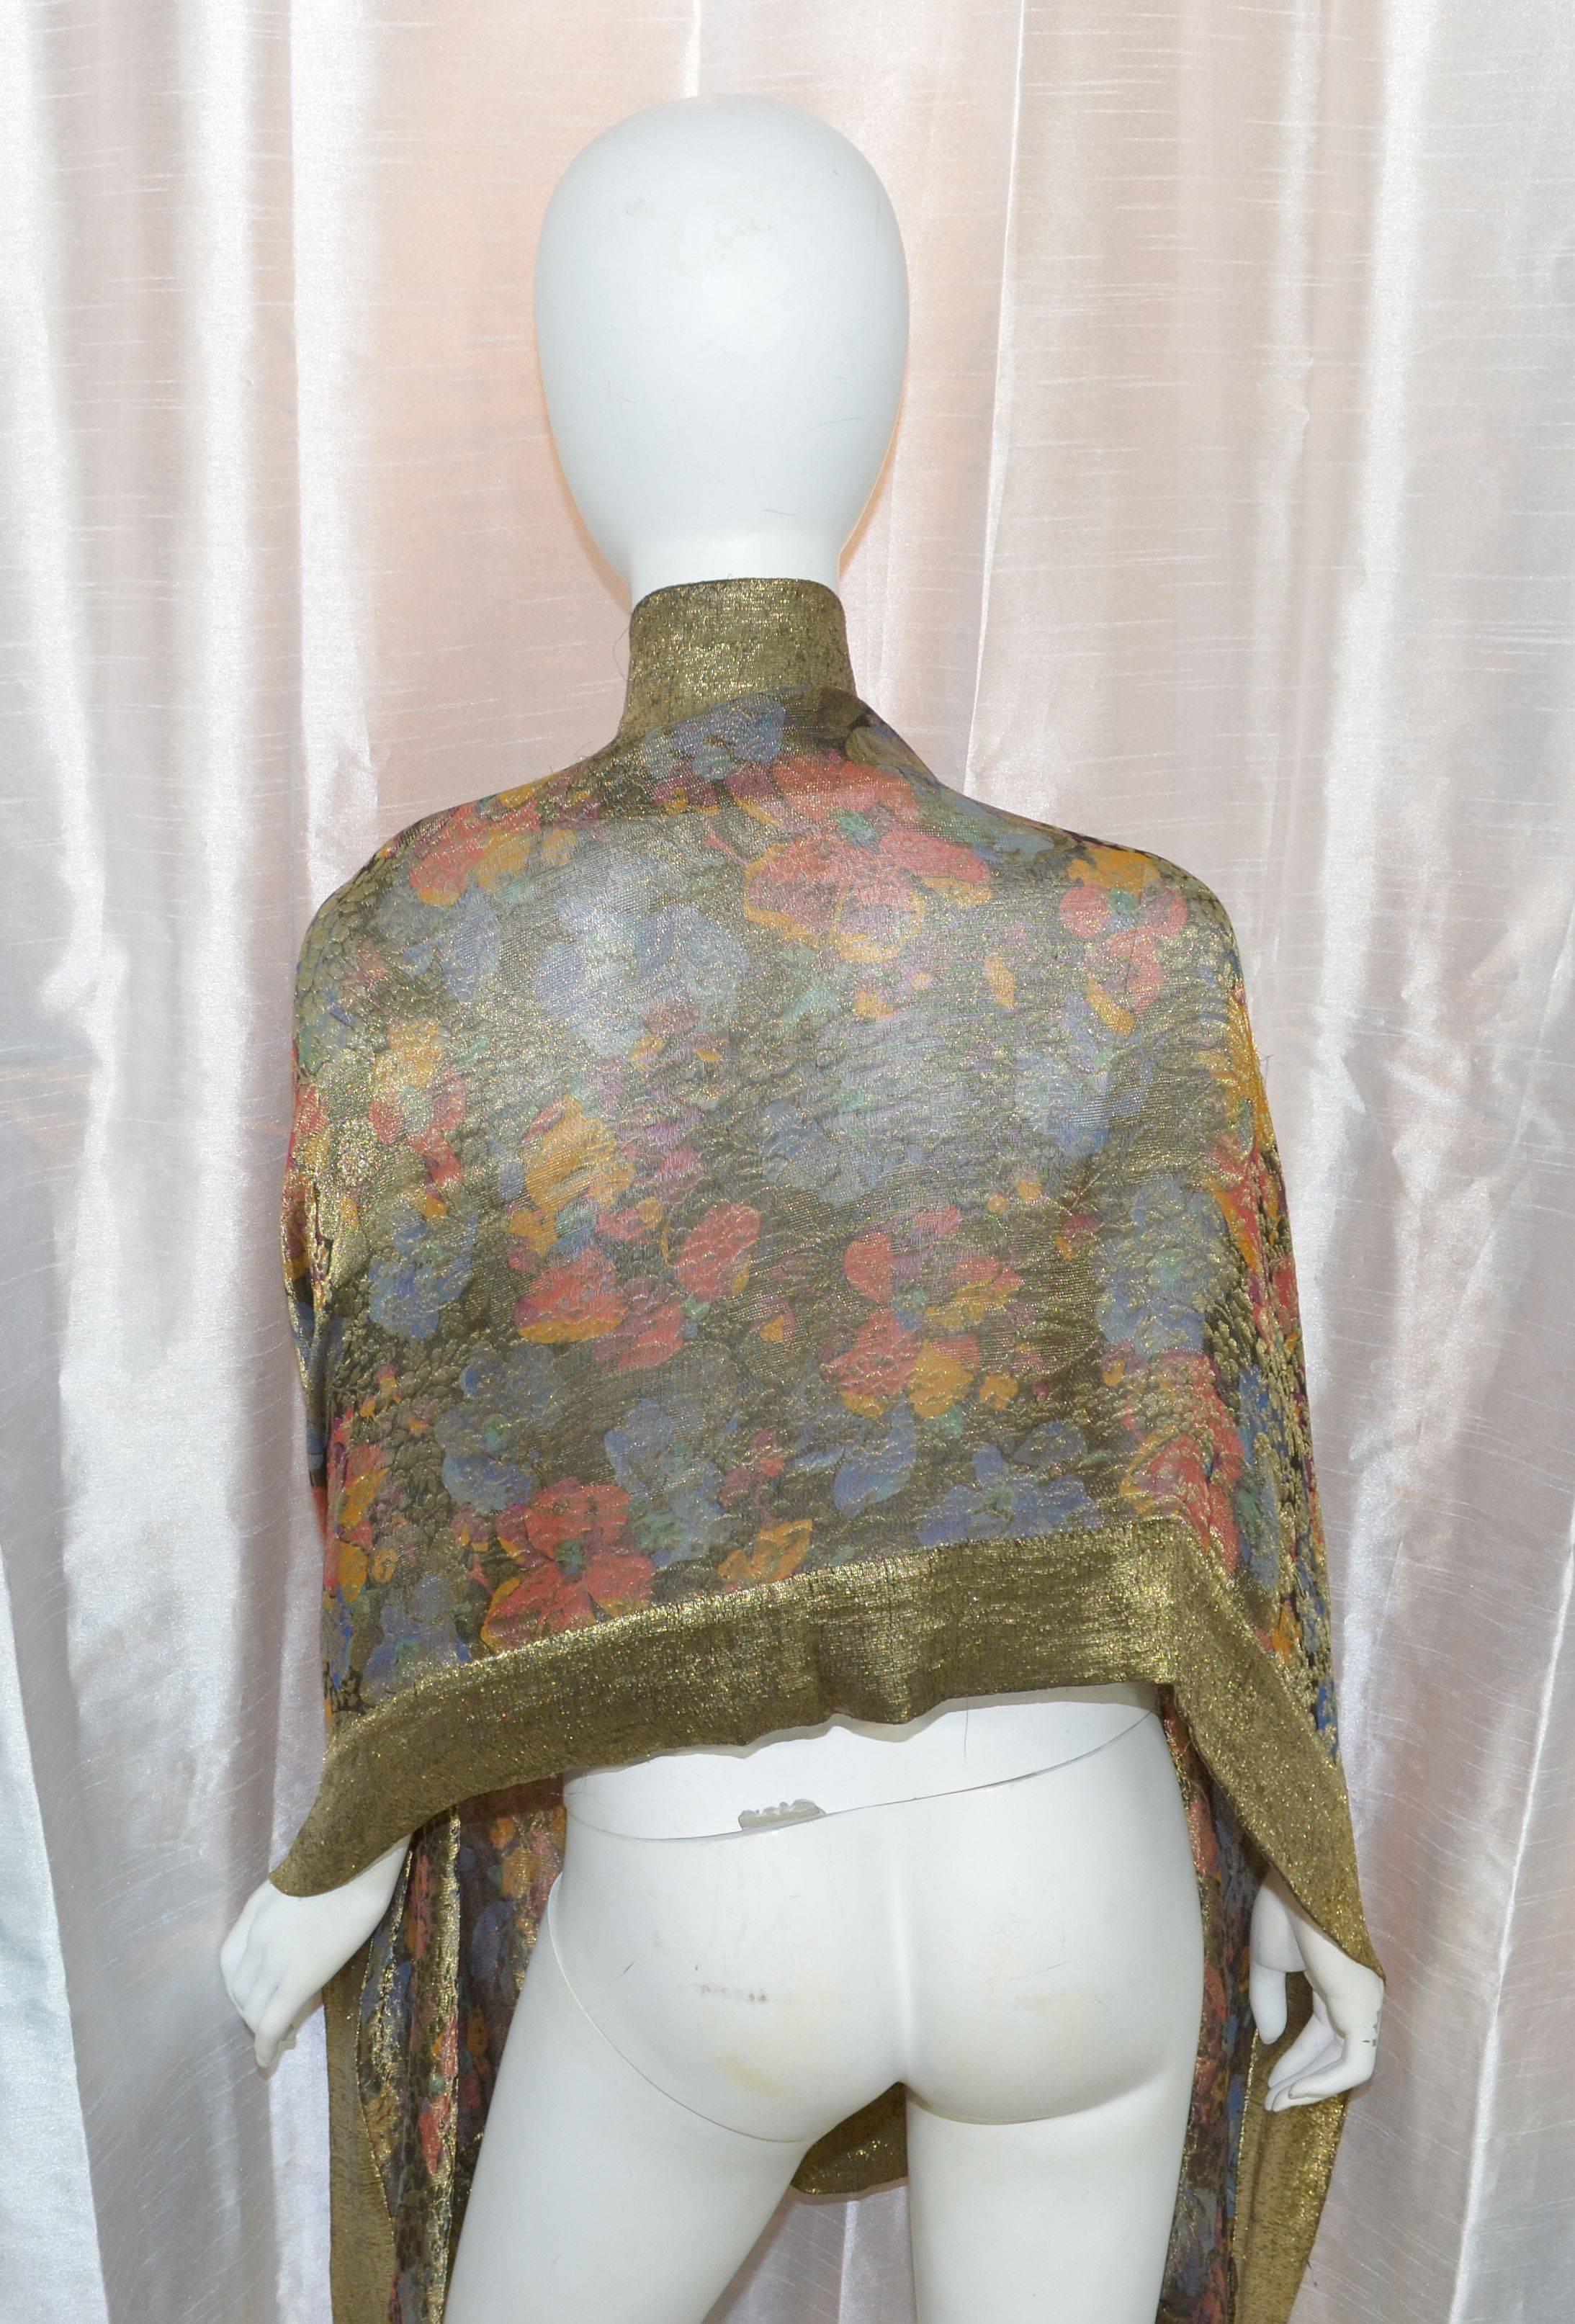 Featured is an exquisite 1920s art deco shawl made of gold 